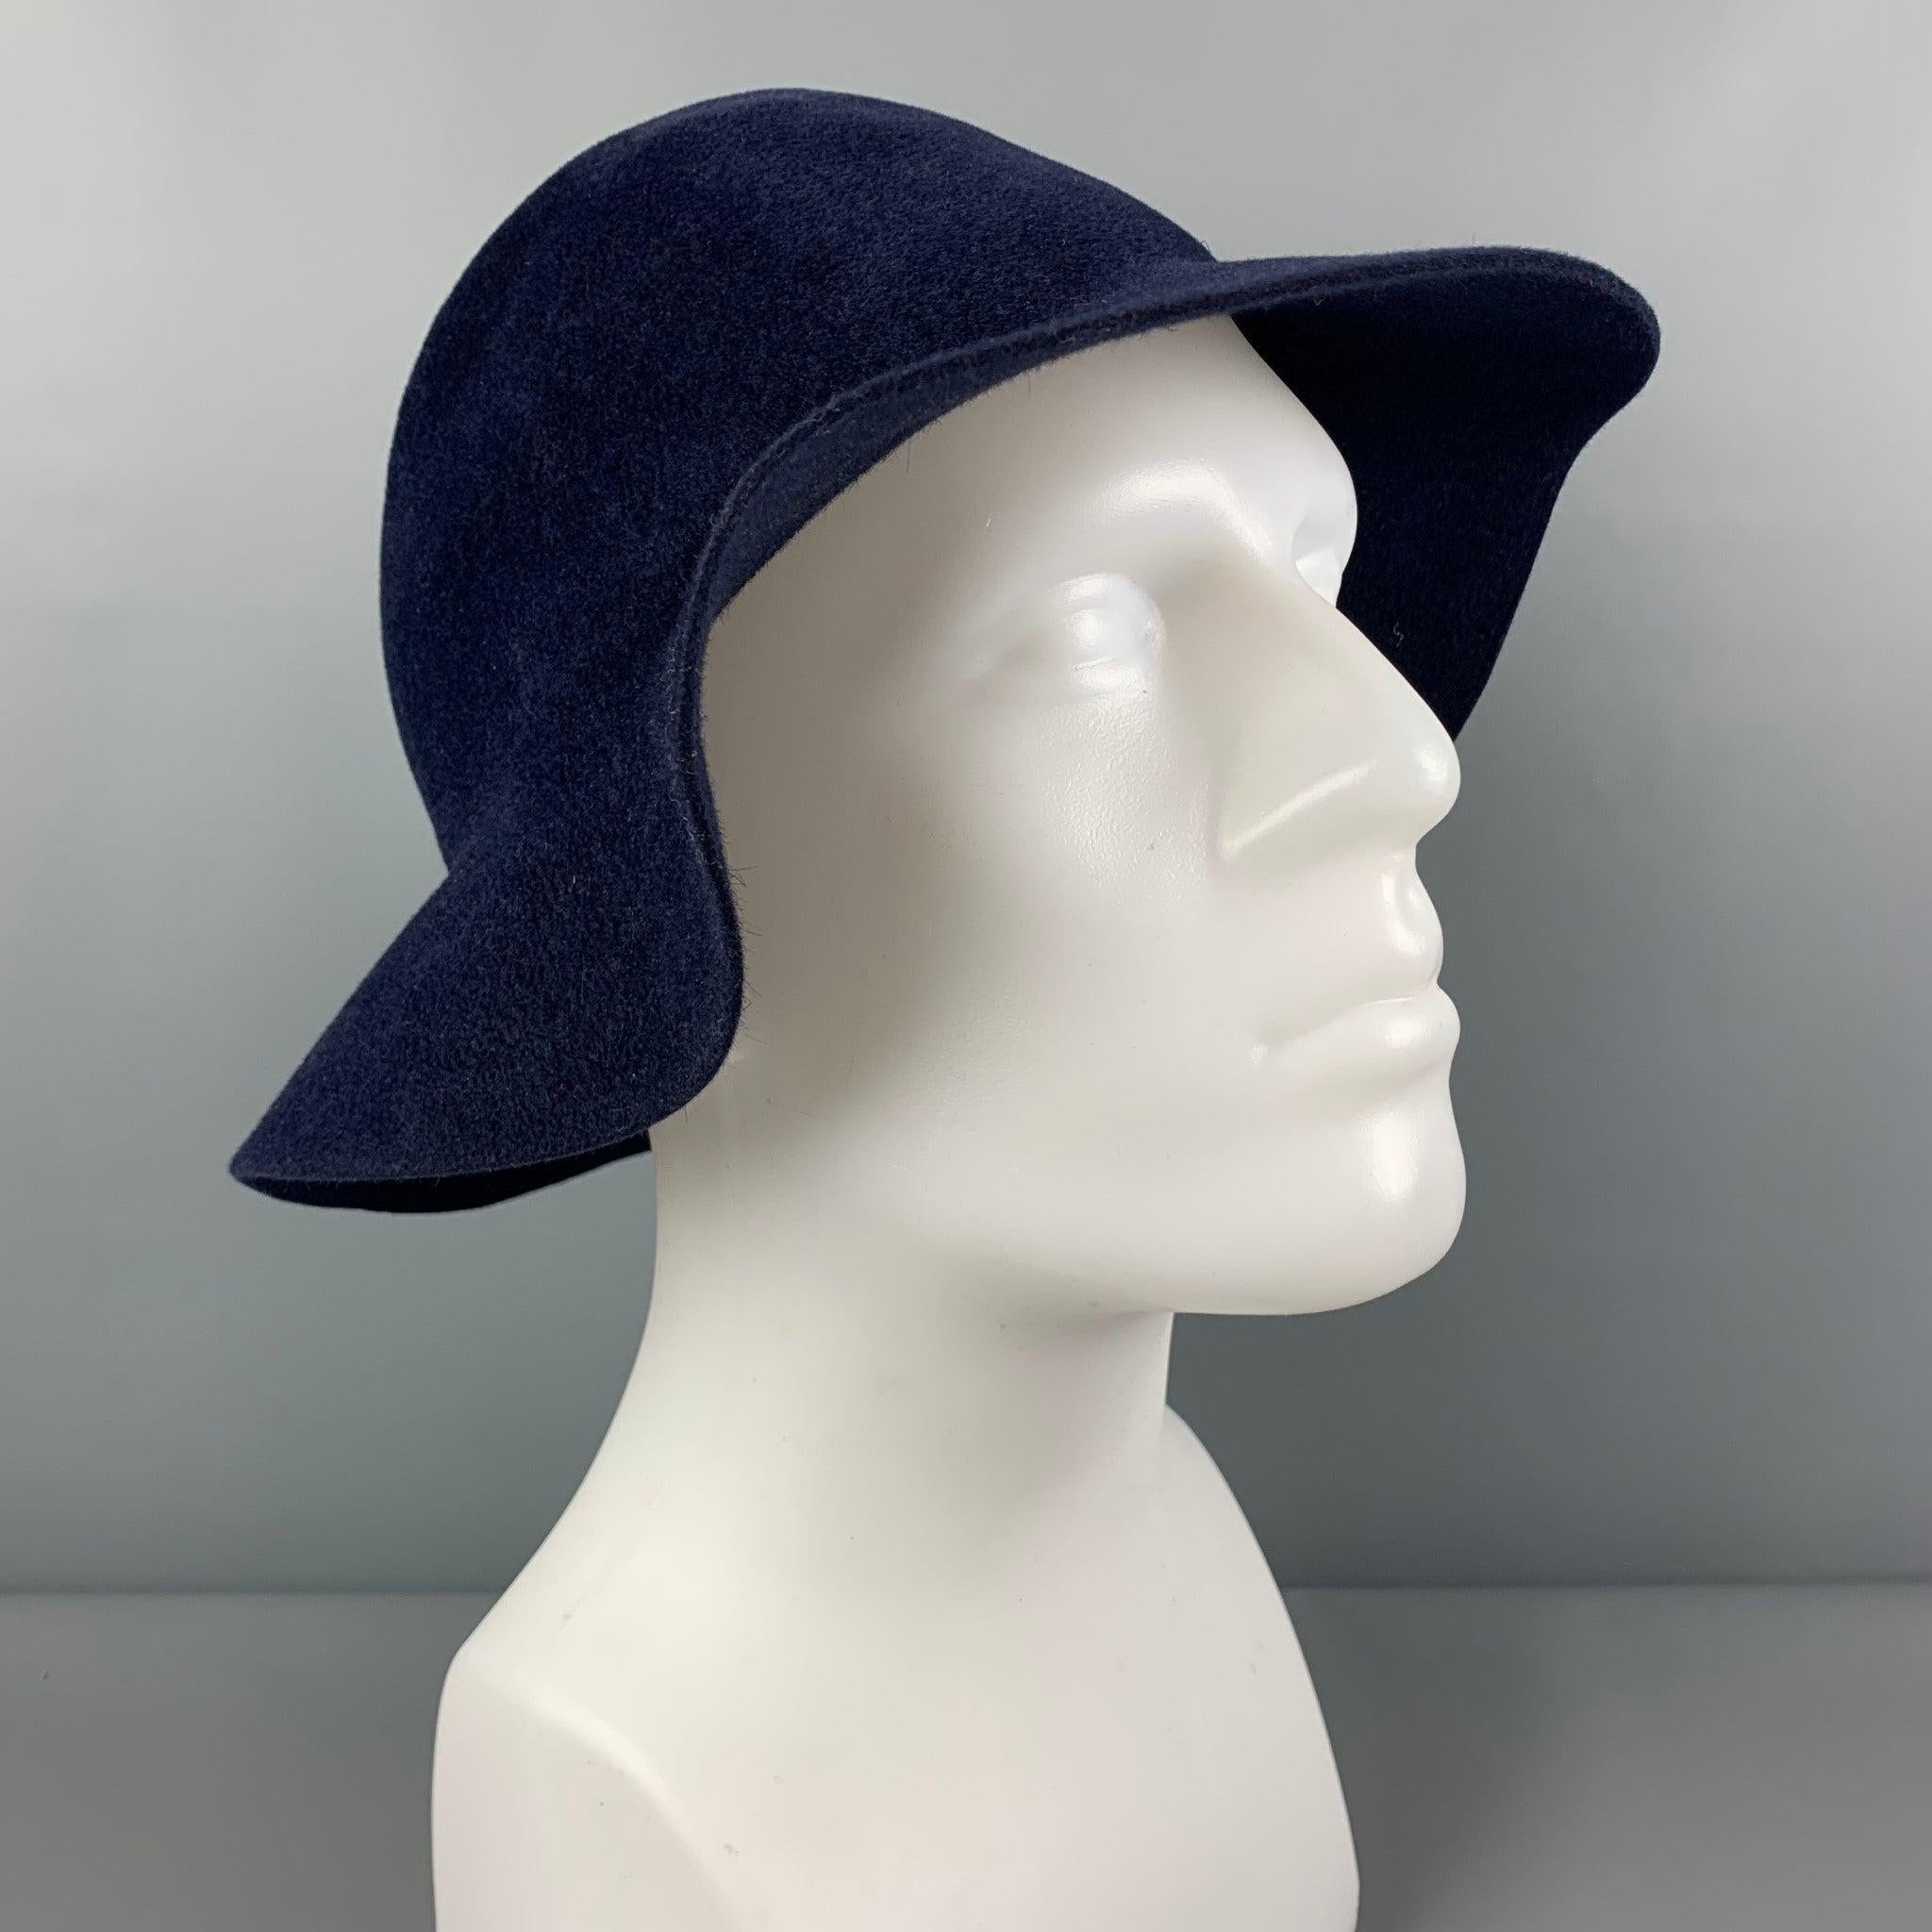 BURBERRY PRORSUM by Christopher Bailey Spring 2015 hat comes in a navy blue rabbit fur felt and a ribbon trim. Made in Italy.
Very Good
Pre-Owned Condition. 

Marked:   L 

Measurements: 
  Opening: 22.5 inches Brim: 22.5 inches Height: 5 inches 
 